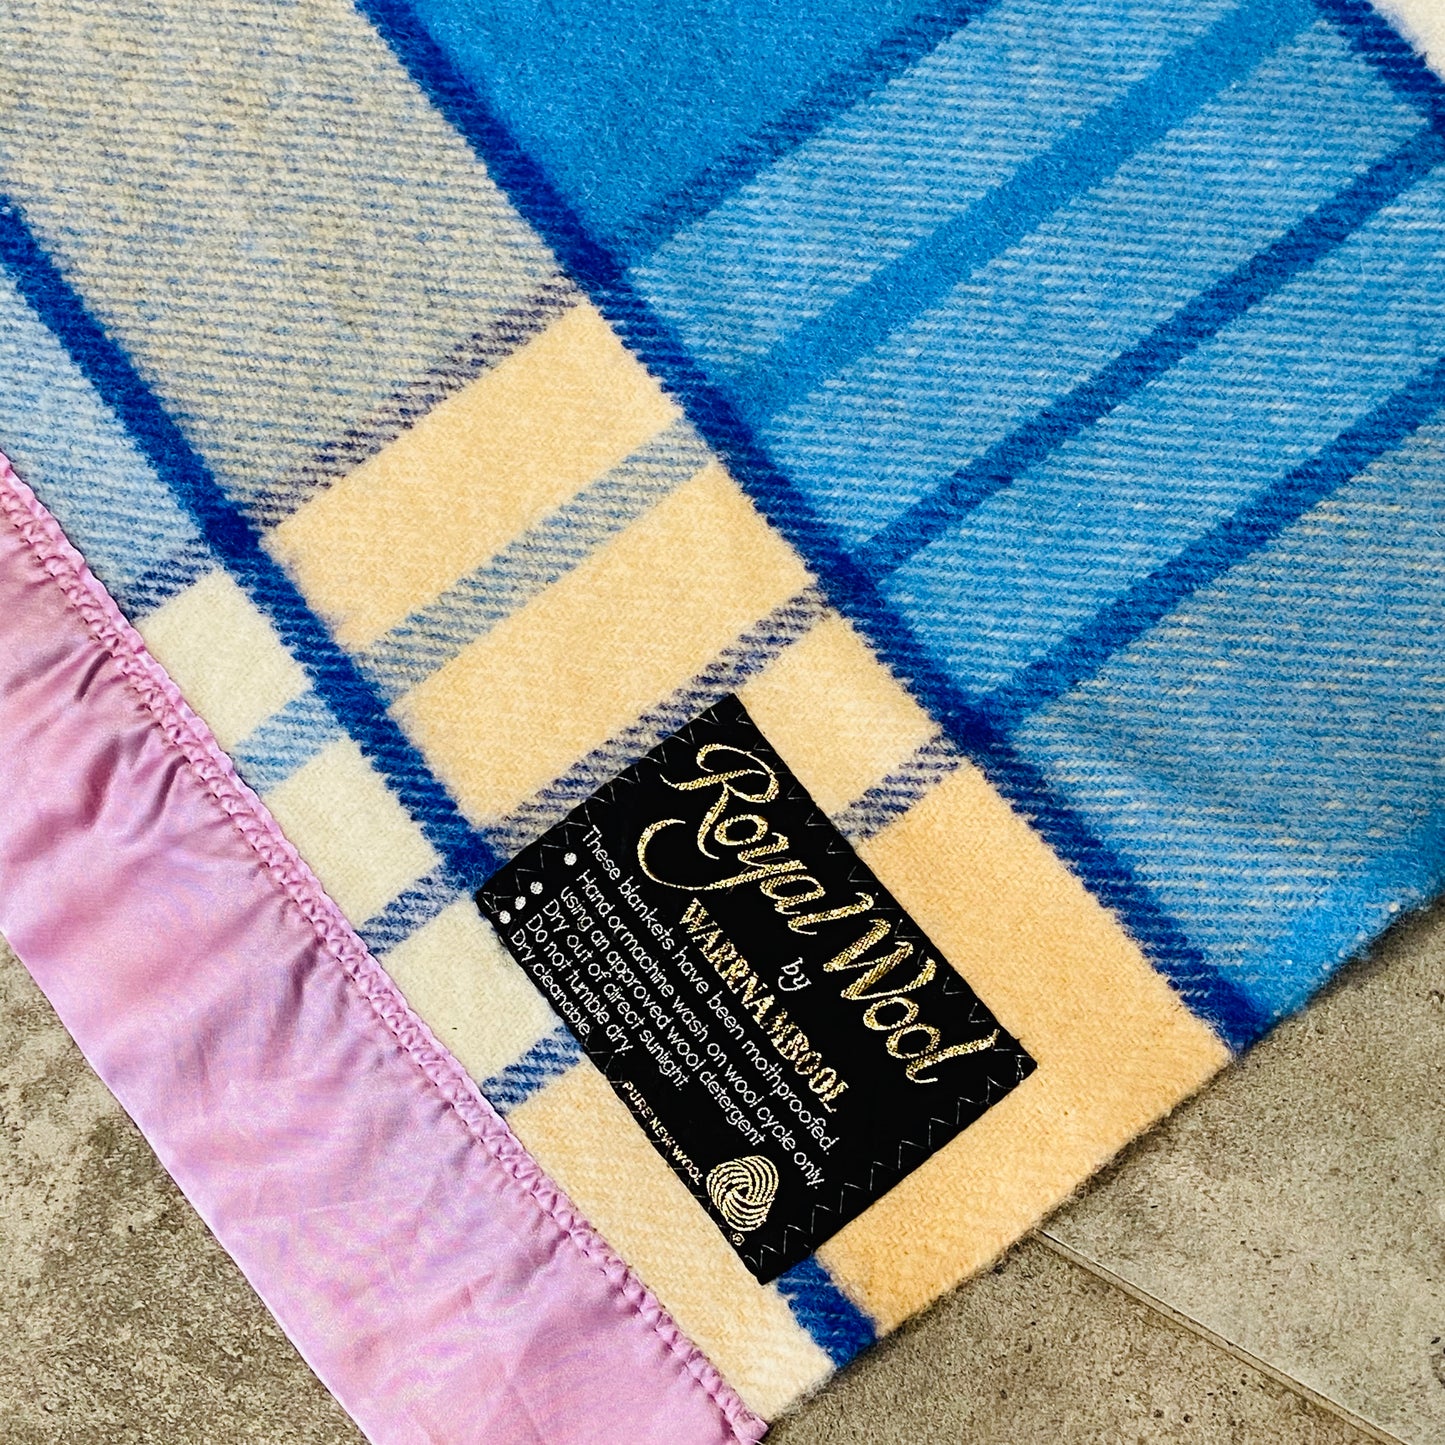 Royal Wool Warrnambool Blue Checked Vintage Blanket PERFECT Cond